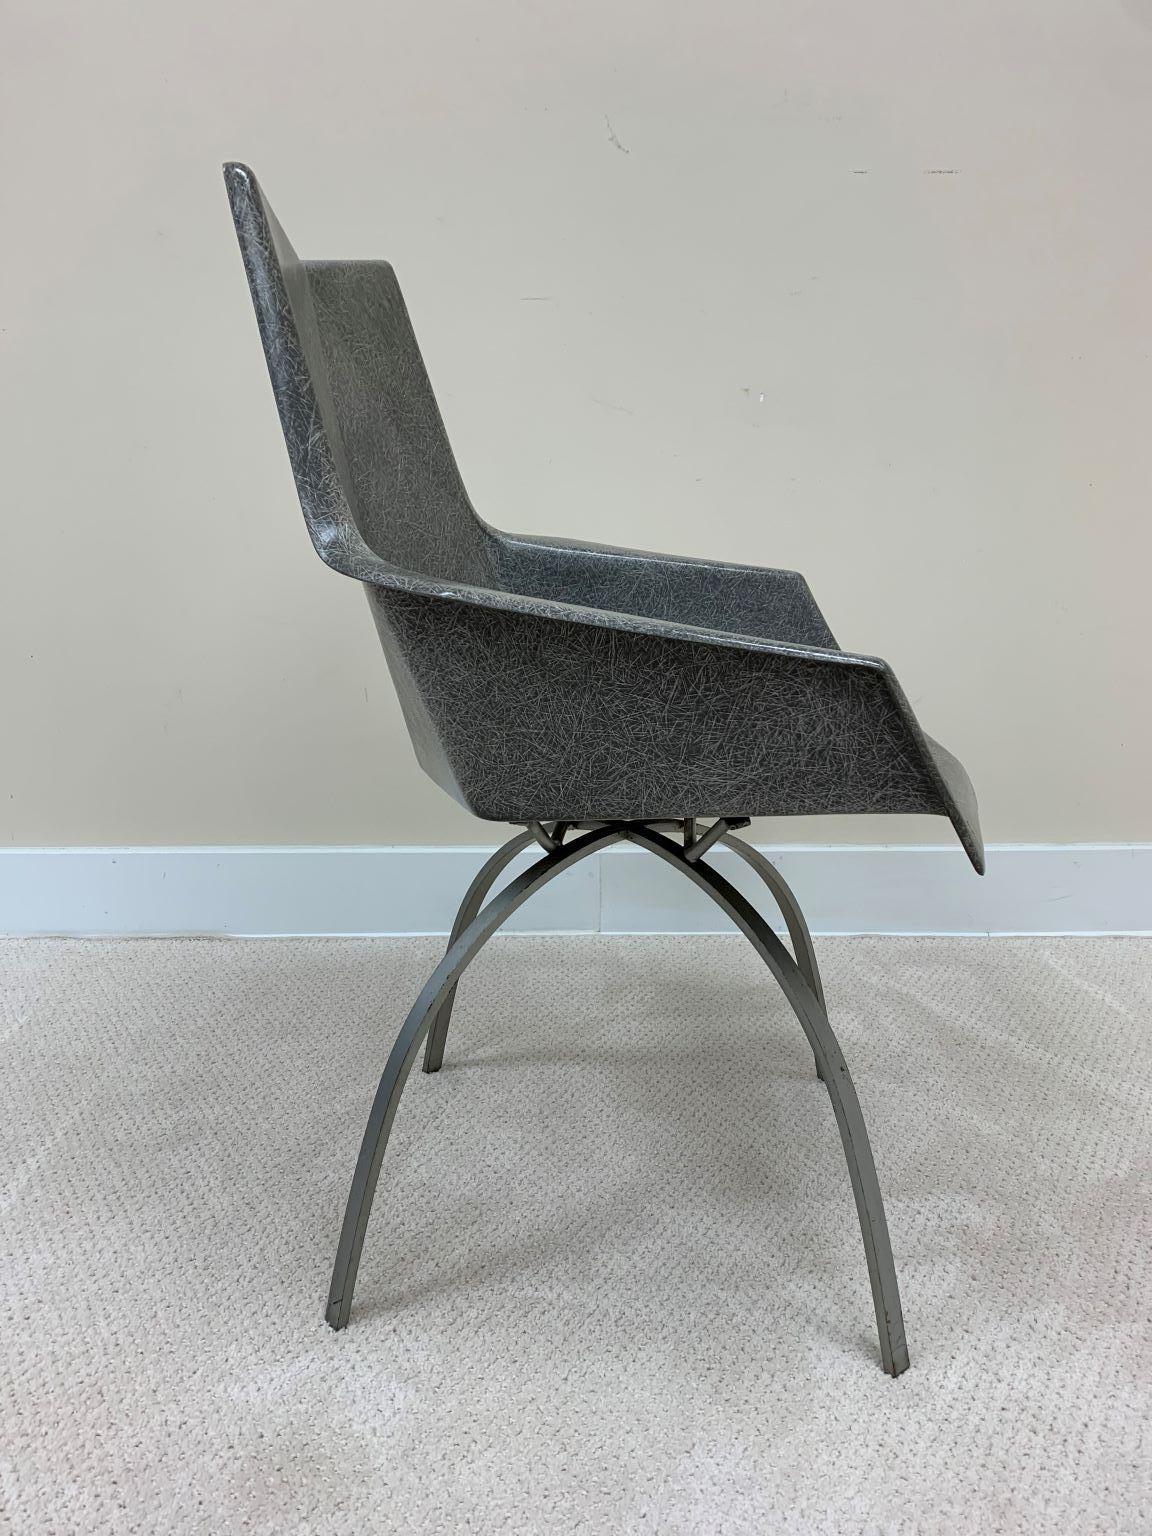 Iconic and Rare Origami Fiberglass Chair with Spider Leg Base by Paul McCobb 2